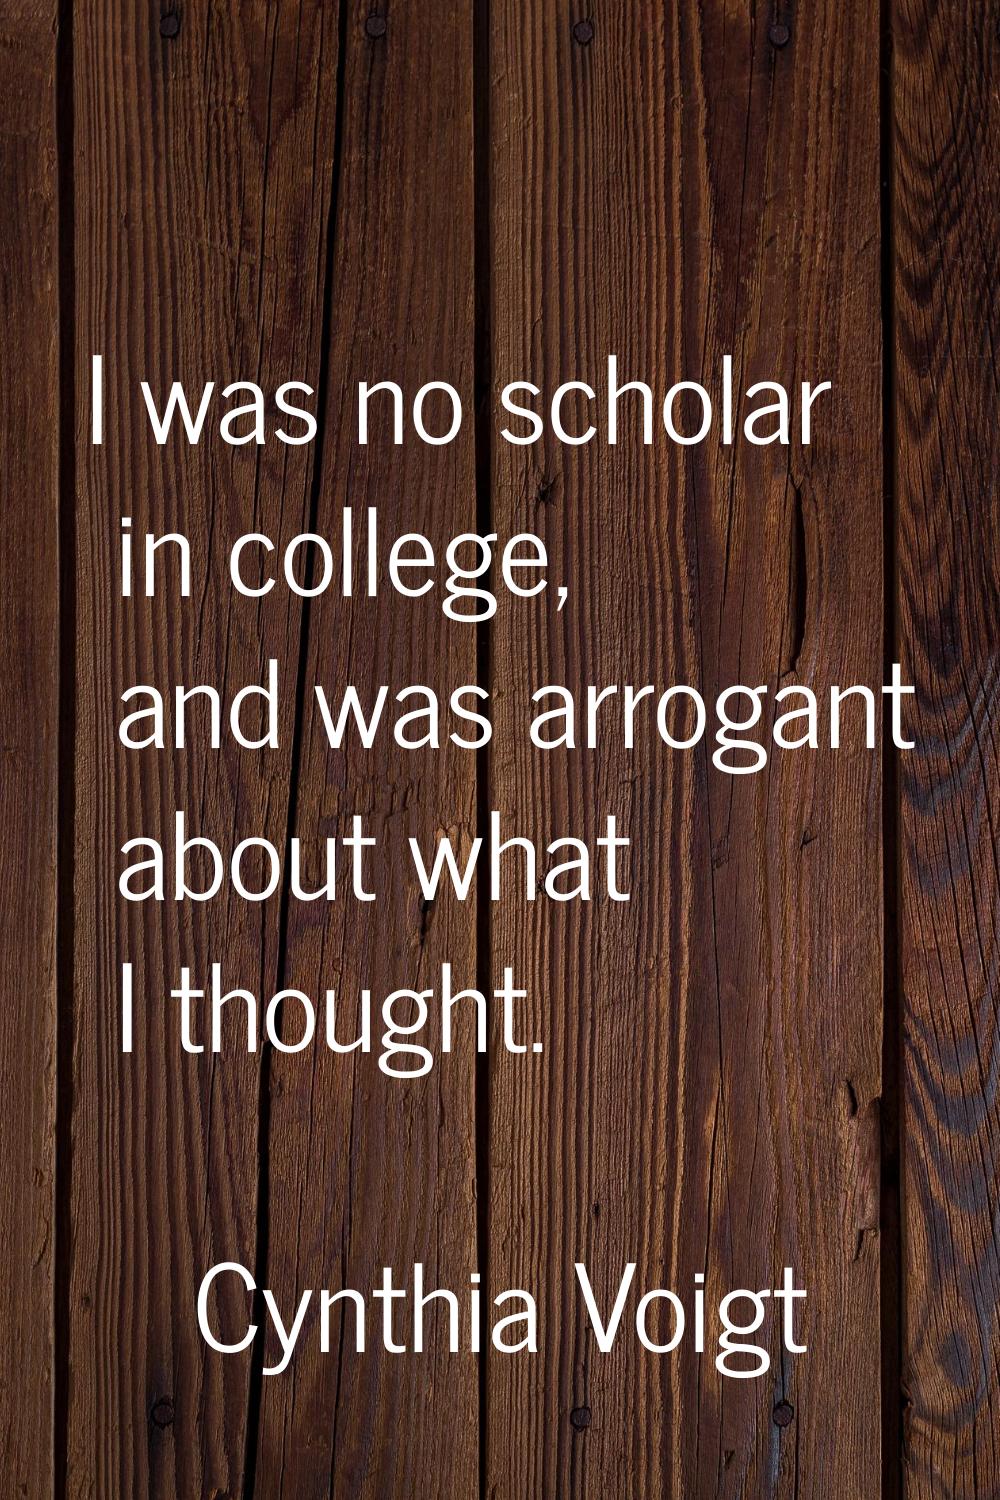 I was no scholar in college, and was arrogant about what I thought.